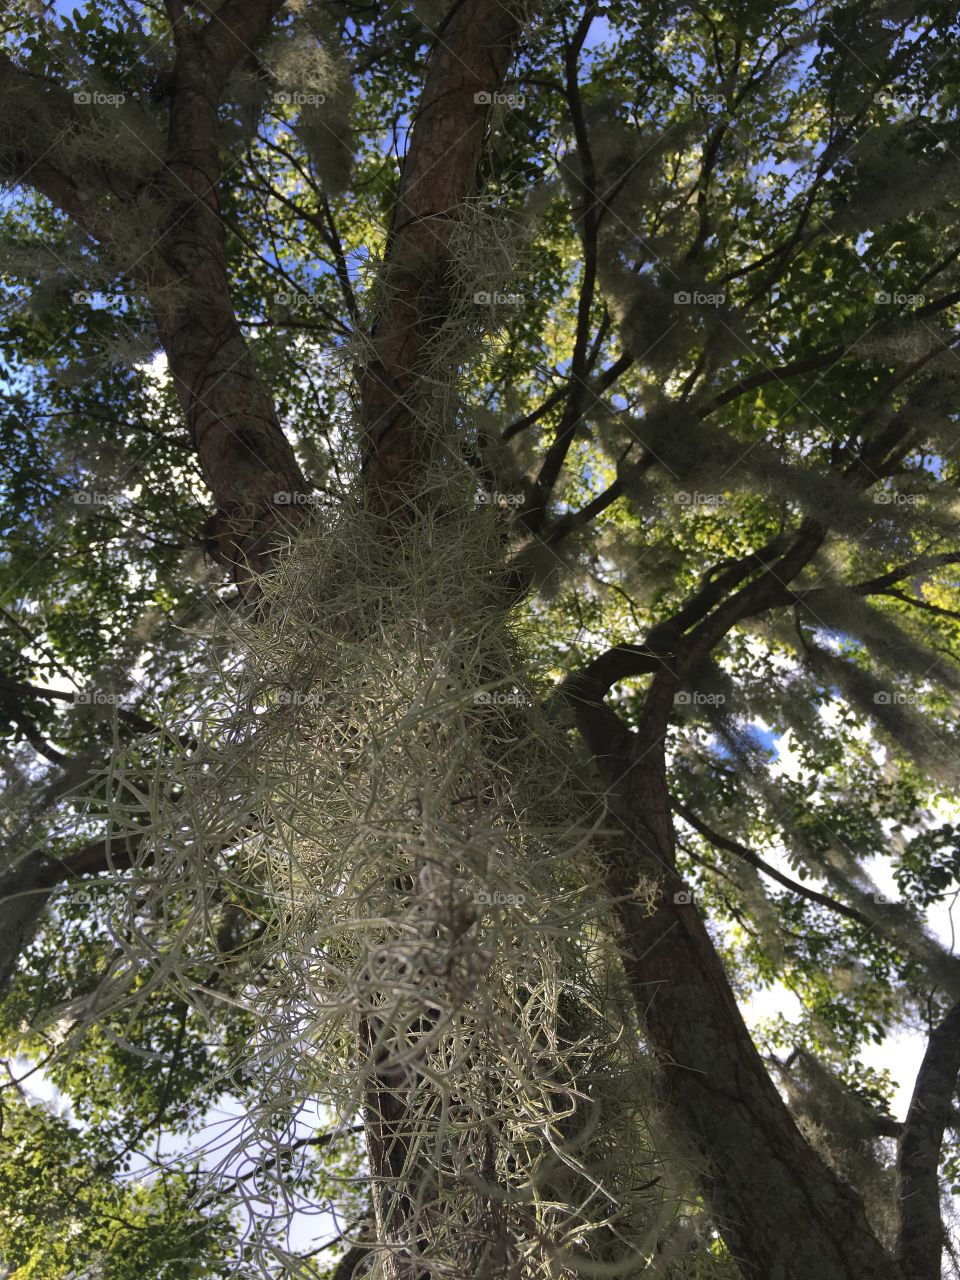 Old oak tree with hanging Moss located in Winter Park, Florida.